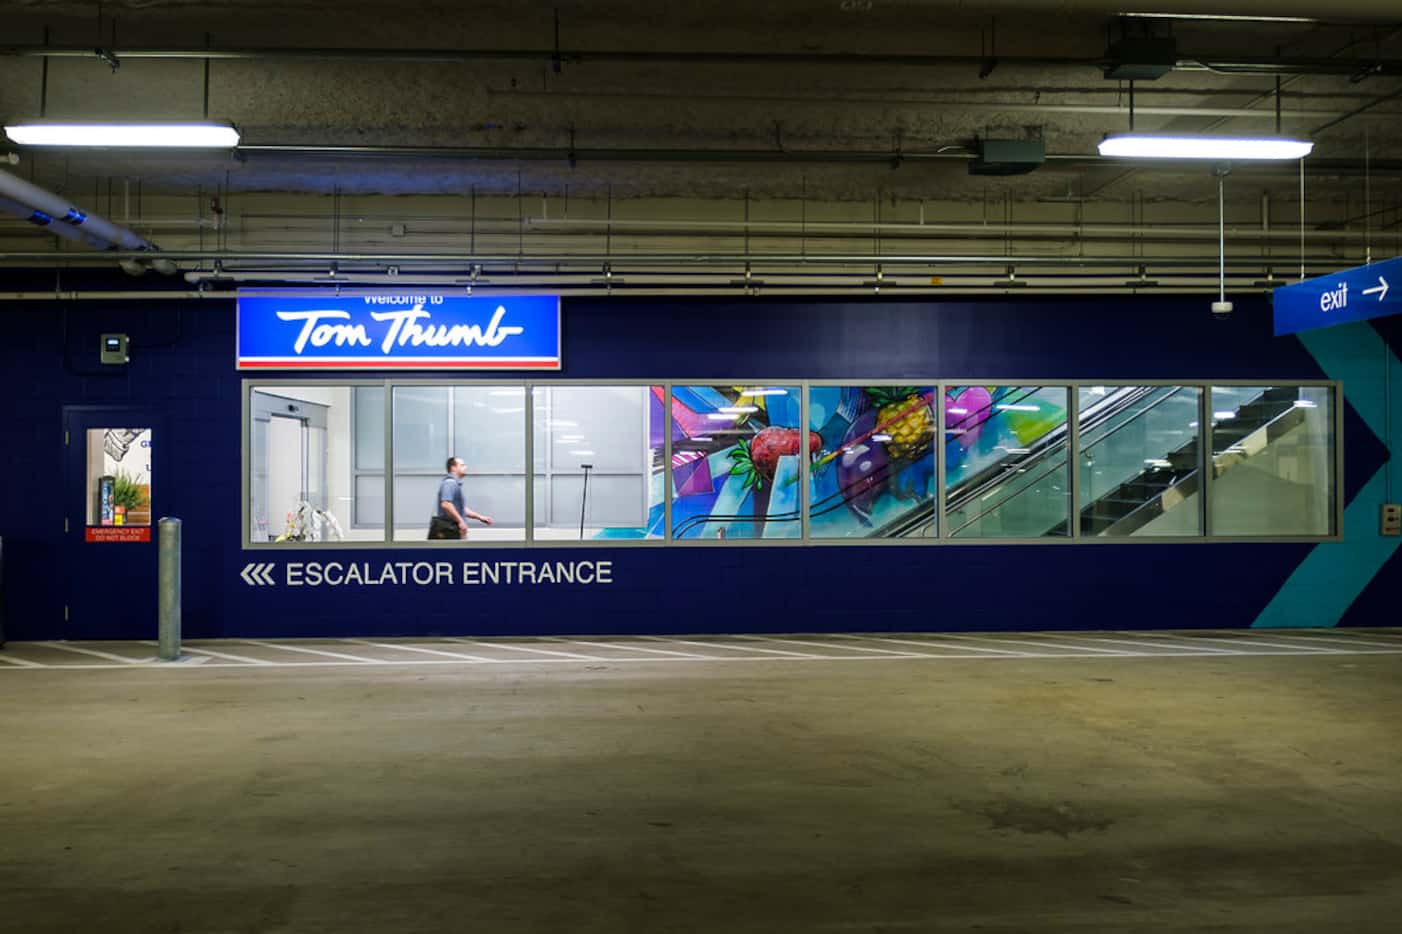 Parking garage entrance to the new Tom Thumb at the Union. The store has a special escalator...